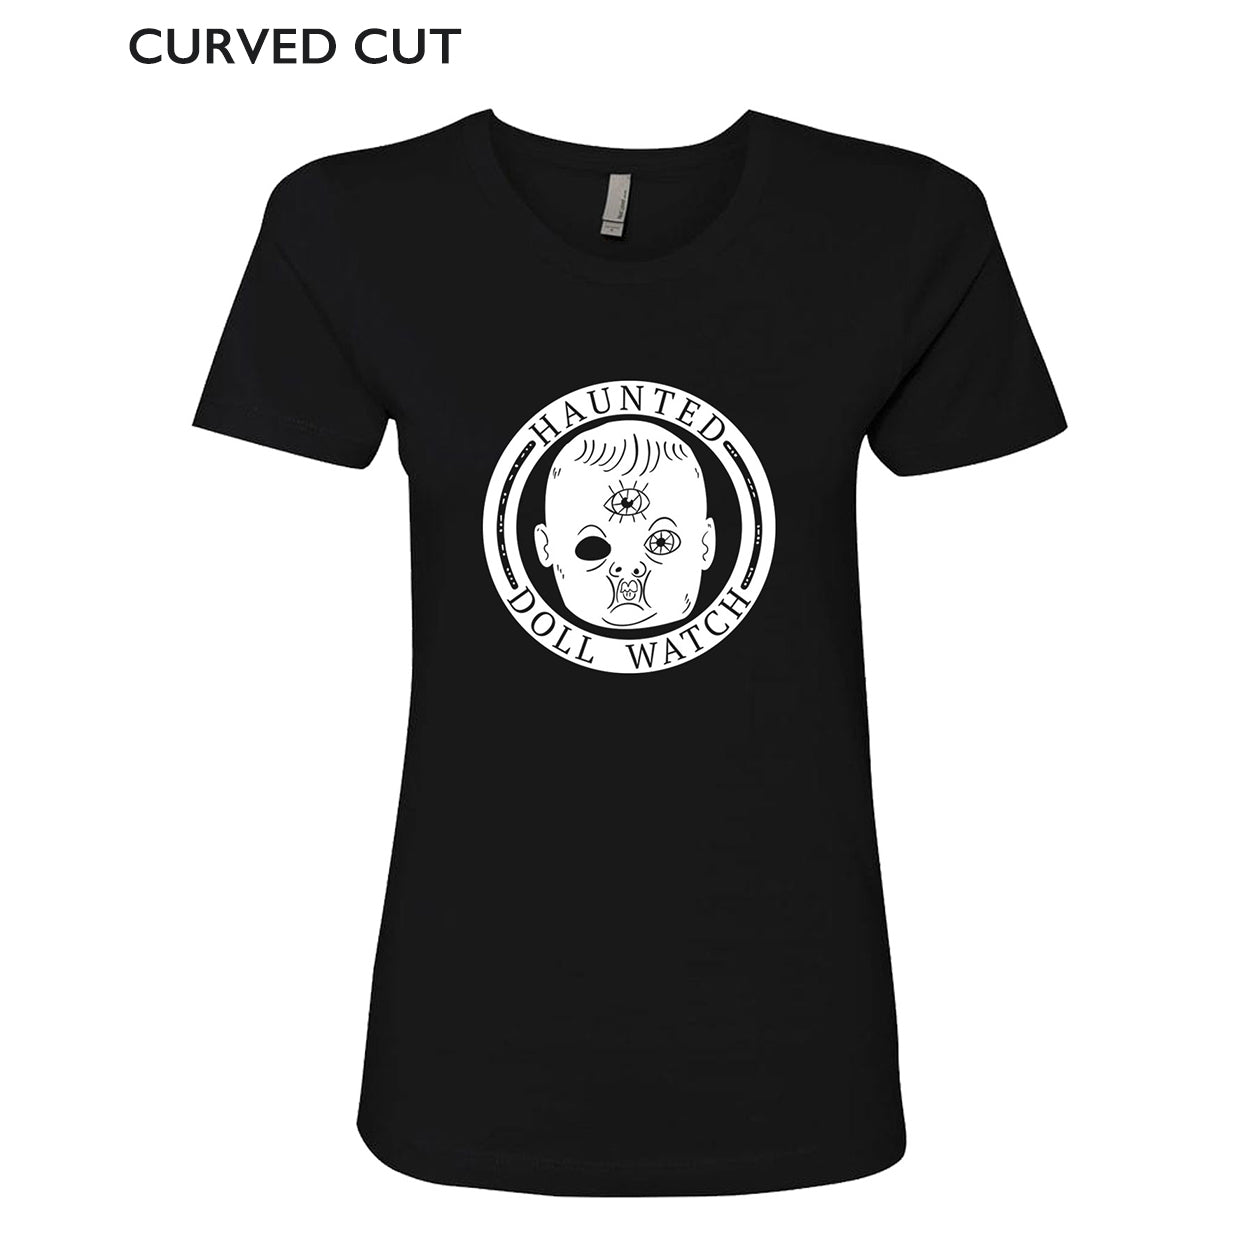 A black curved cut tee-shirt with a white doll head in the middle of a white circle. The doll's left eye is empty with a third eye on its forehead. The circle says, "Haunted doll watch". 